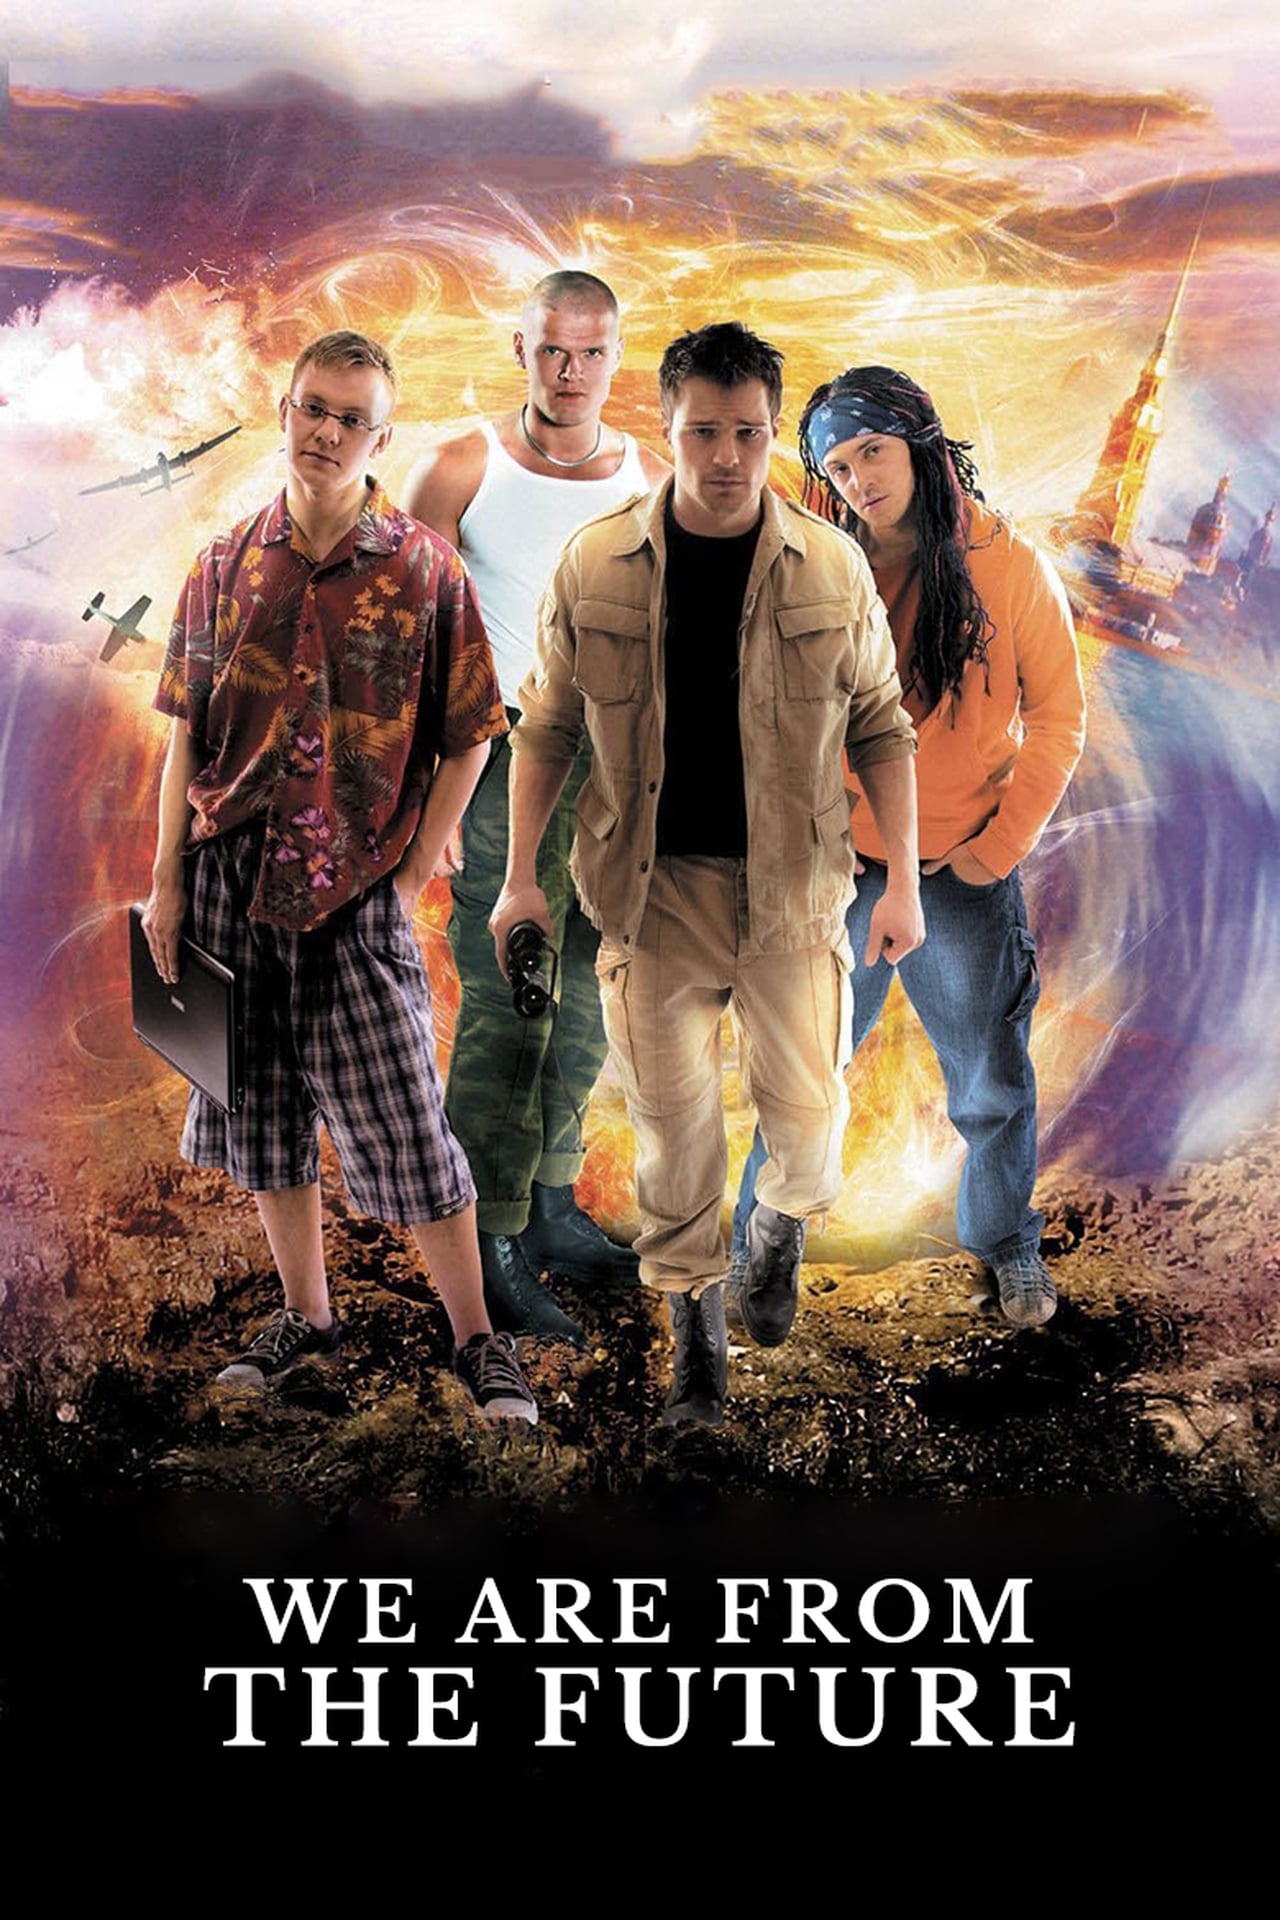 We Are From The Future (2008)